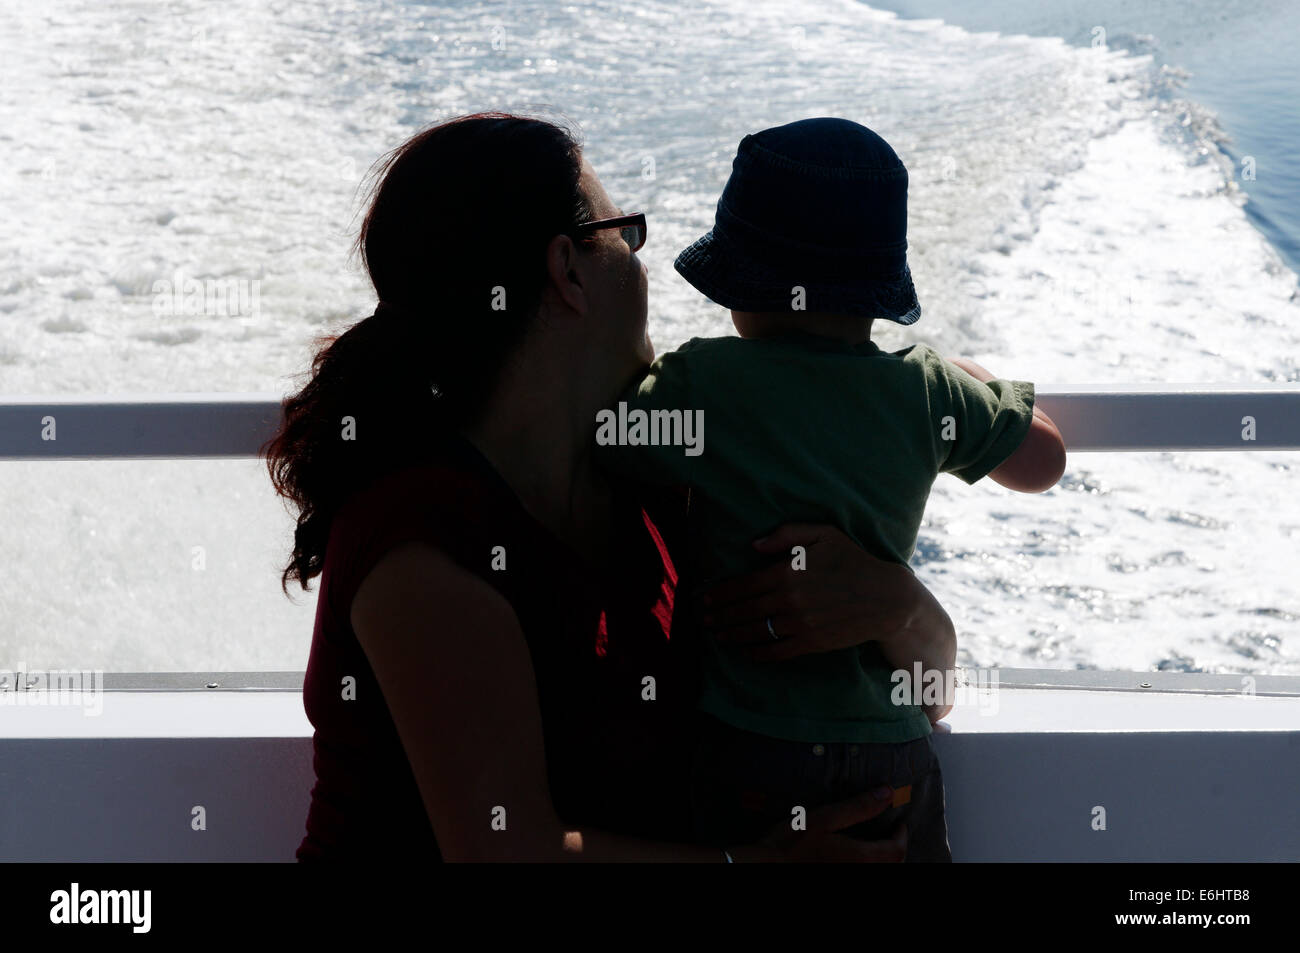 A mother and son silhouetted against the wake of a boat on a summer cruise Stock Photo